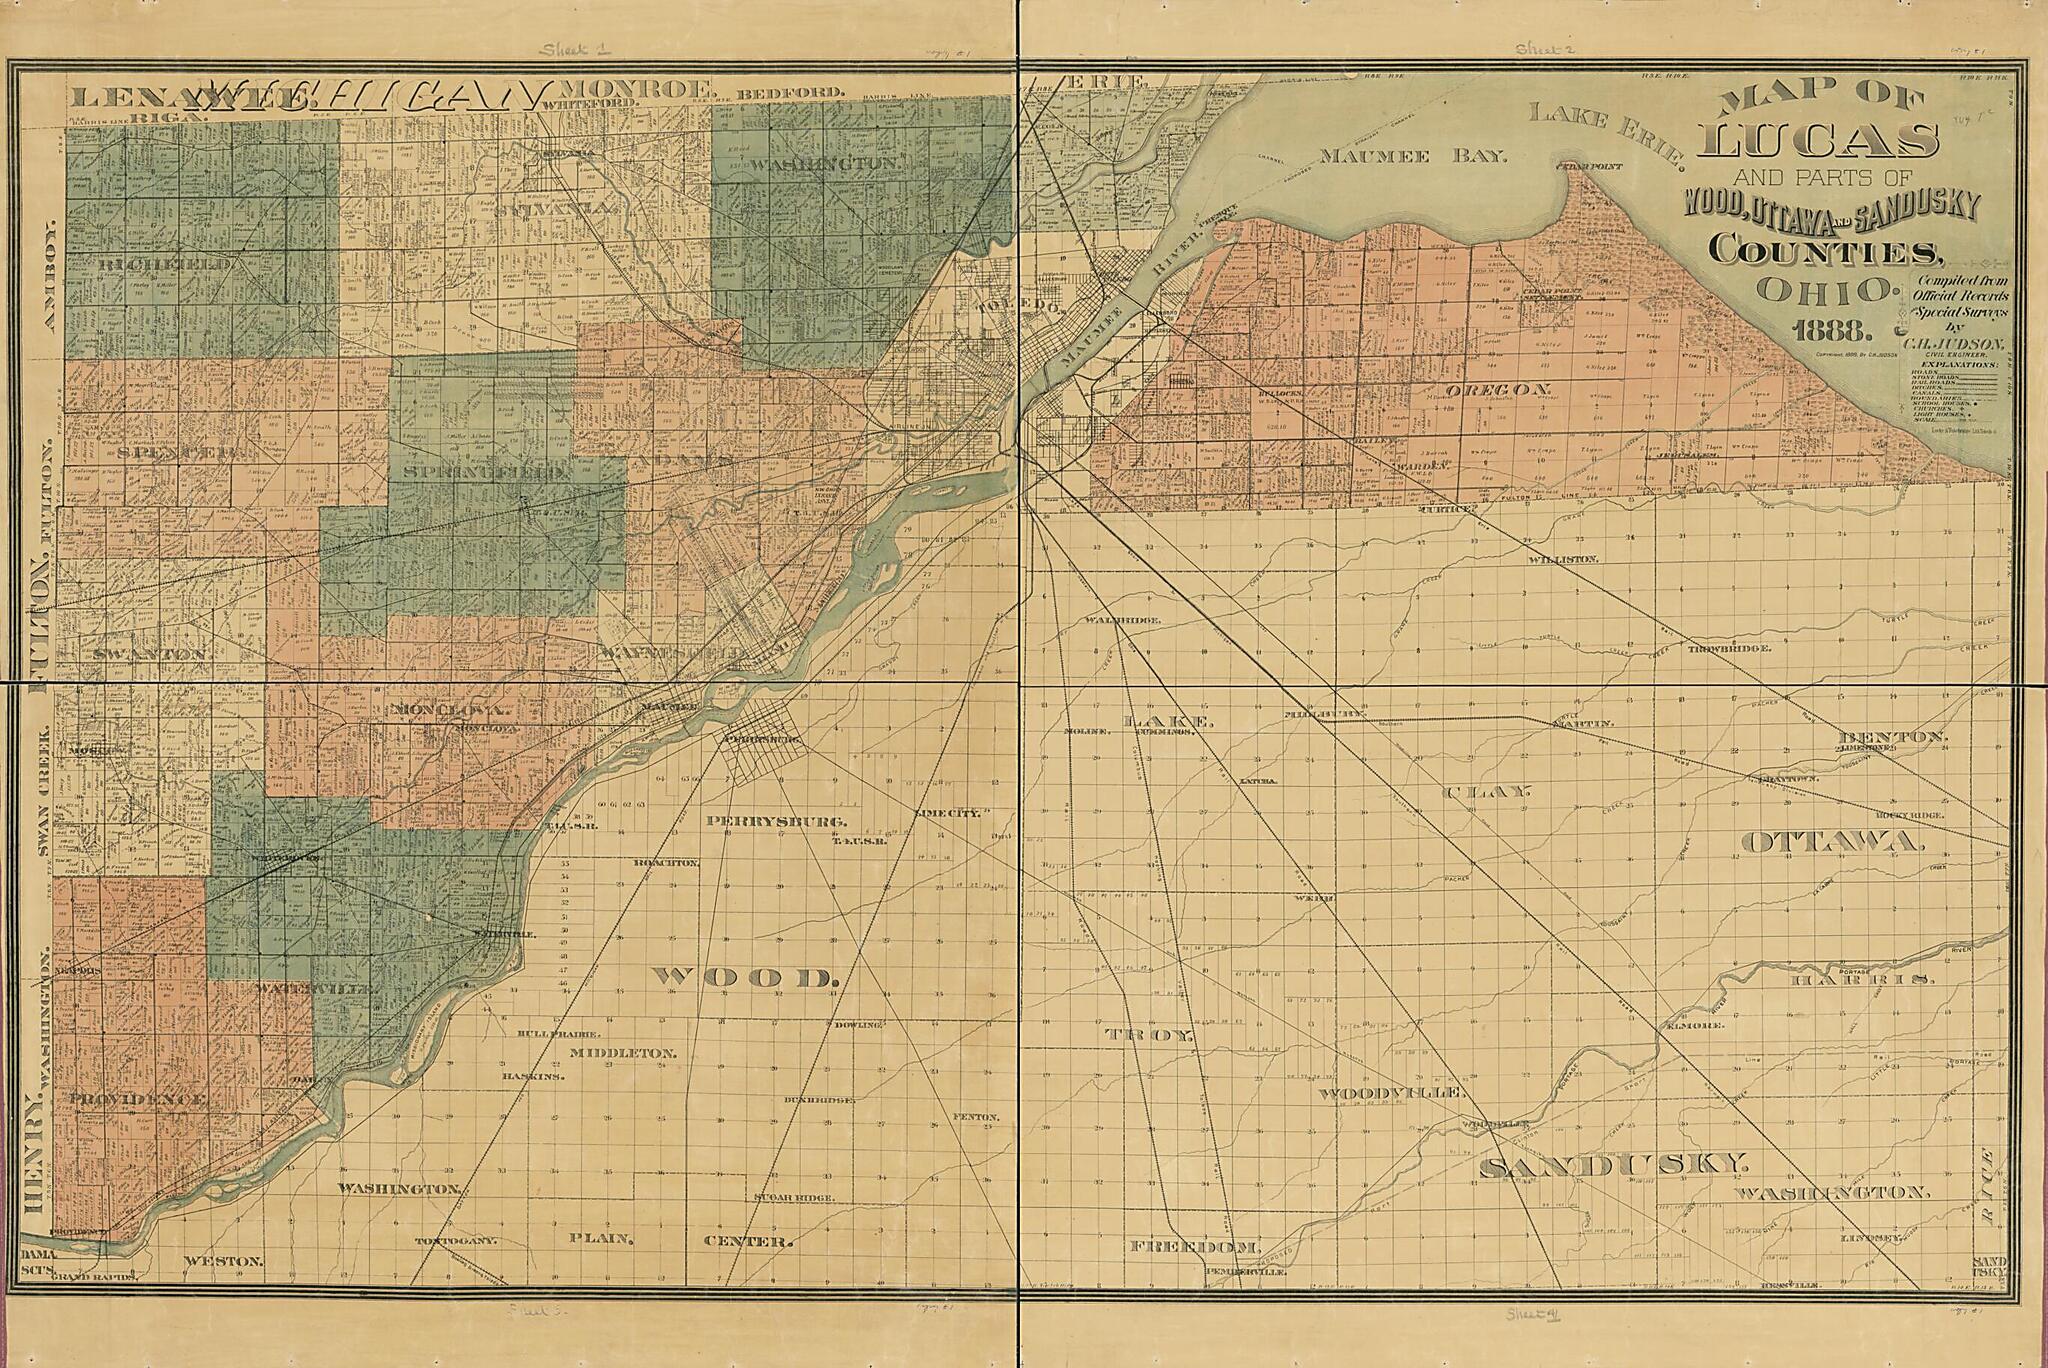 This old map of Map of Lucas and Parts of Wood, Ottawa and Sandusky Counties, Ohio from 1888 was created by C. H. Judson,  Locke &amp; Trowbridge in 1888